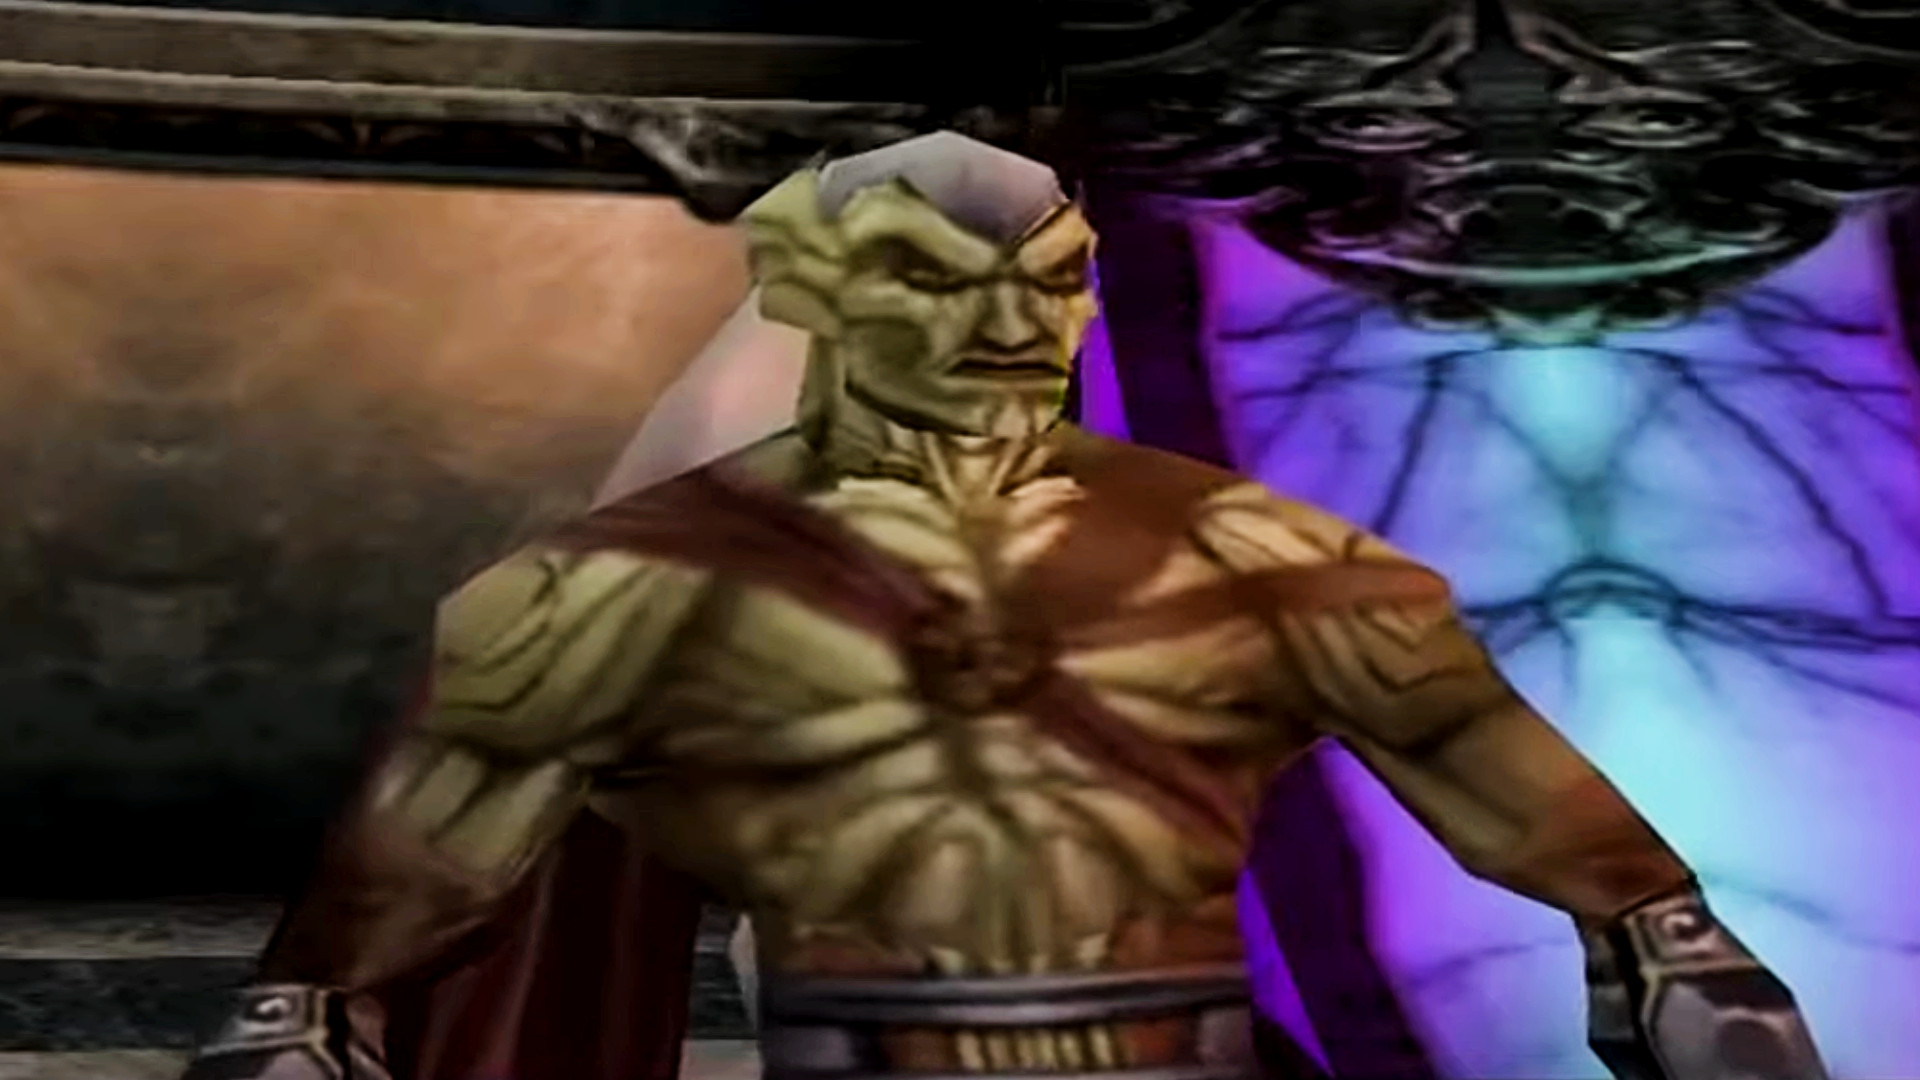 Legacy of Kain: Soul Reaver return looks to be in the works